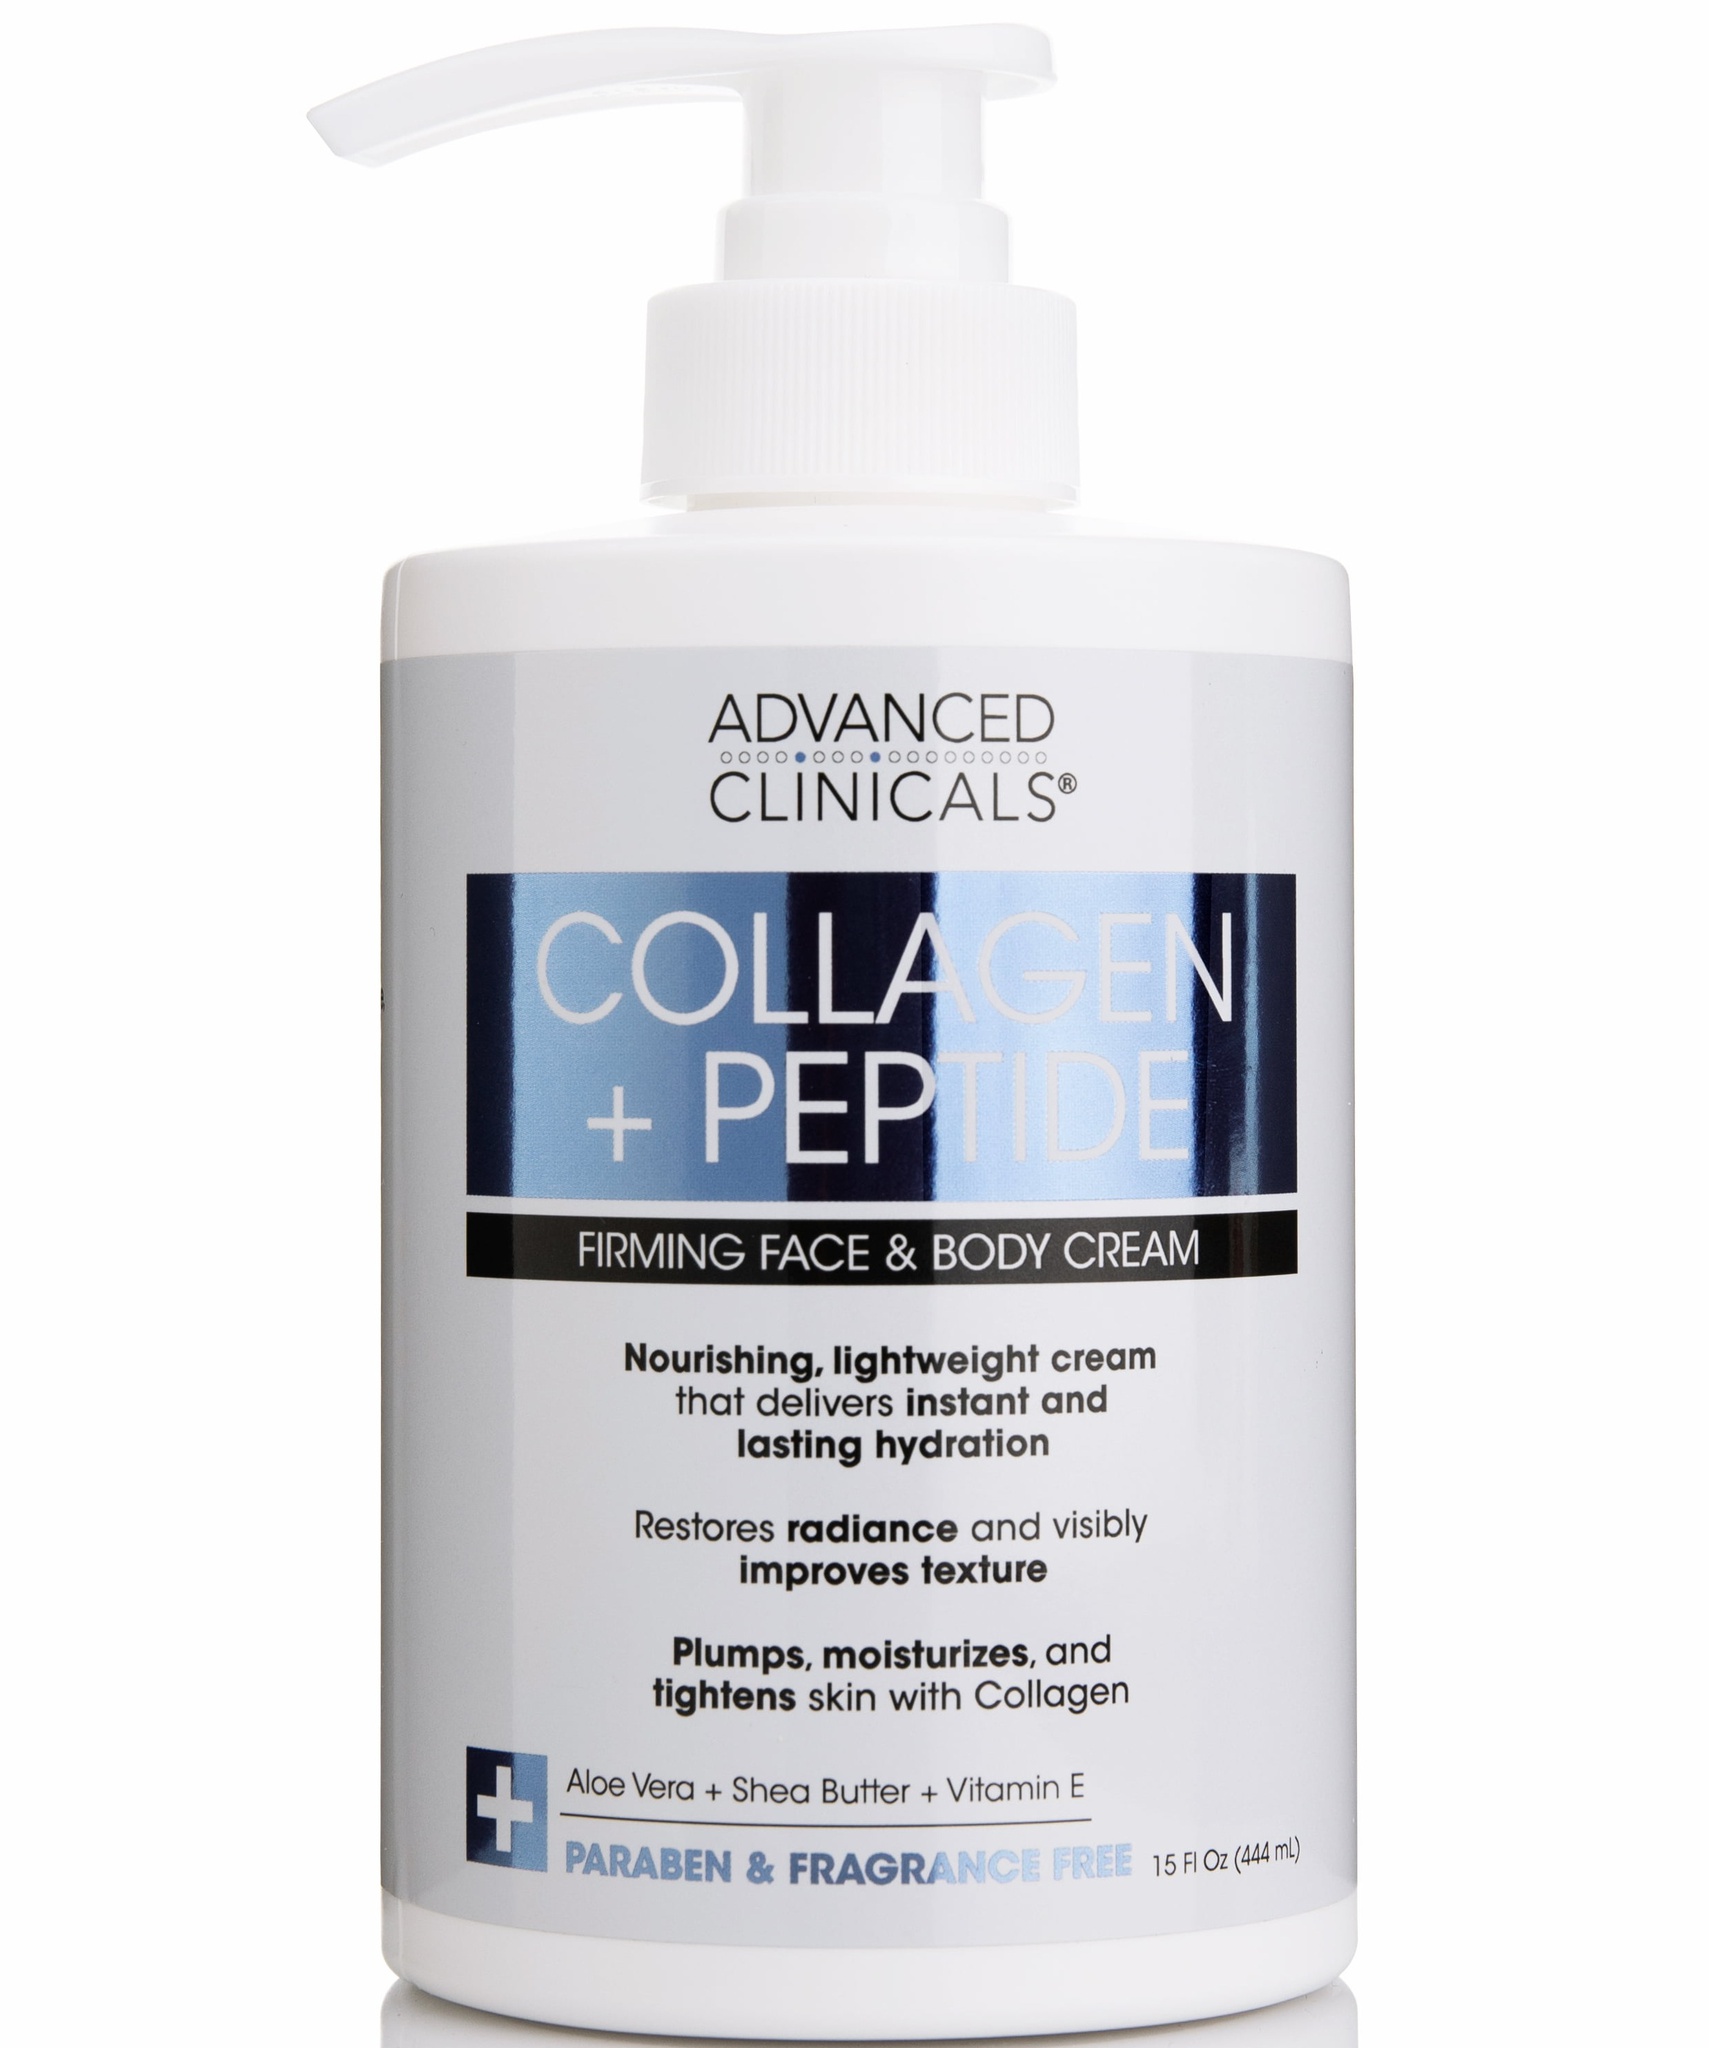 Advanced Clinicals Collagen Lotion + Peptide Firming Face And Body ...